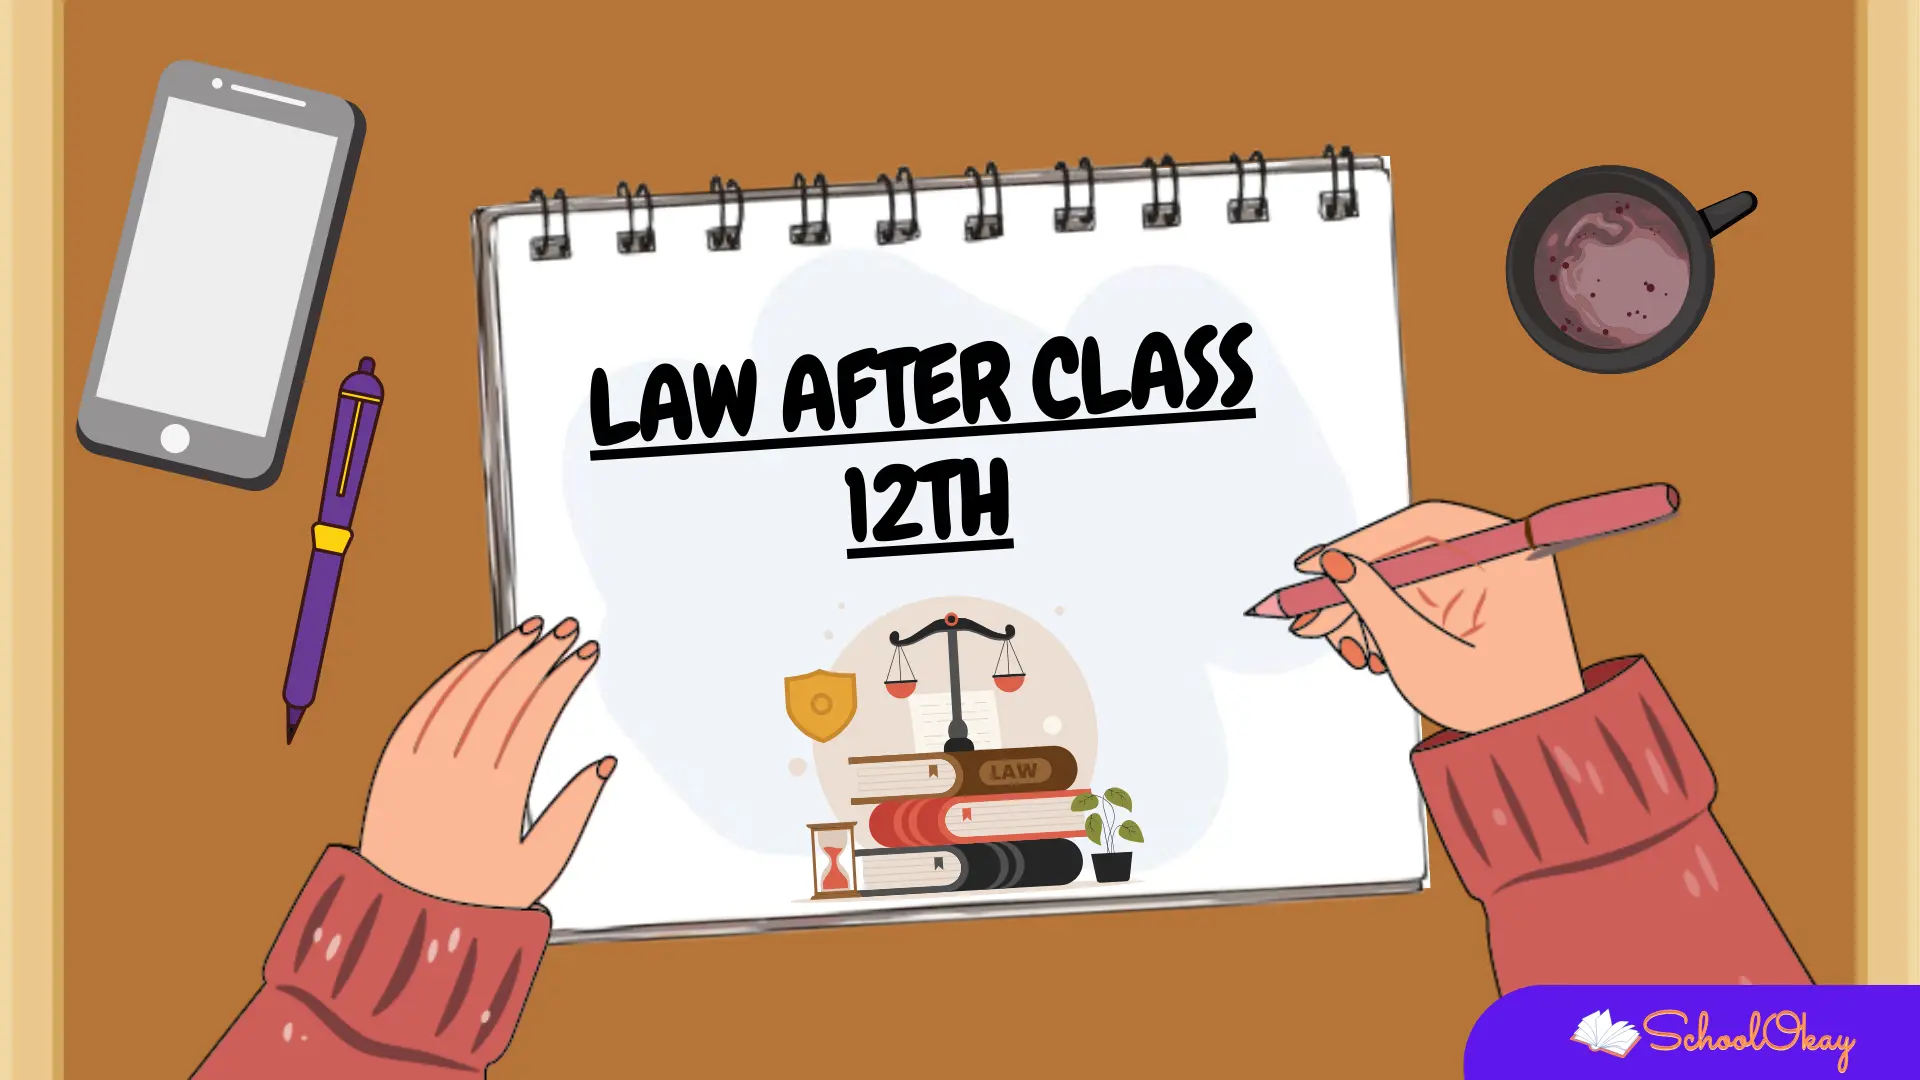 Law after class 12th